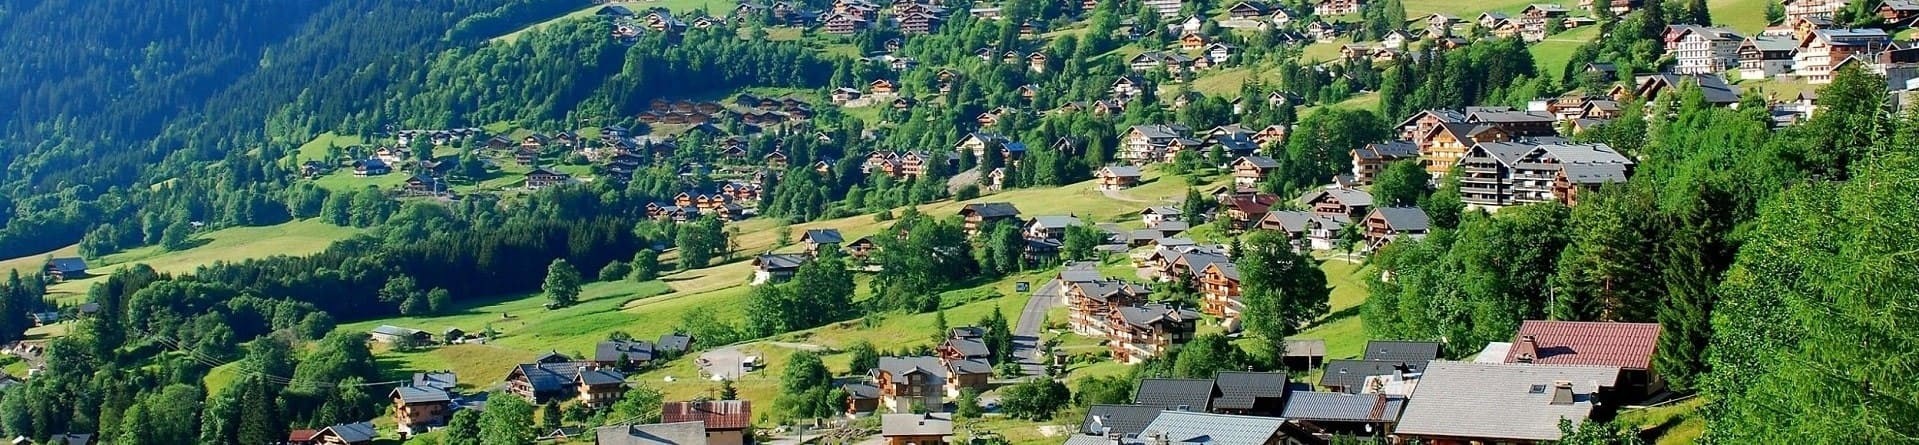 Apartment and chalet rental in Chatel, France